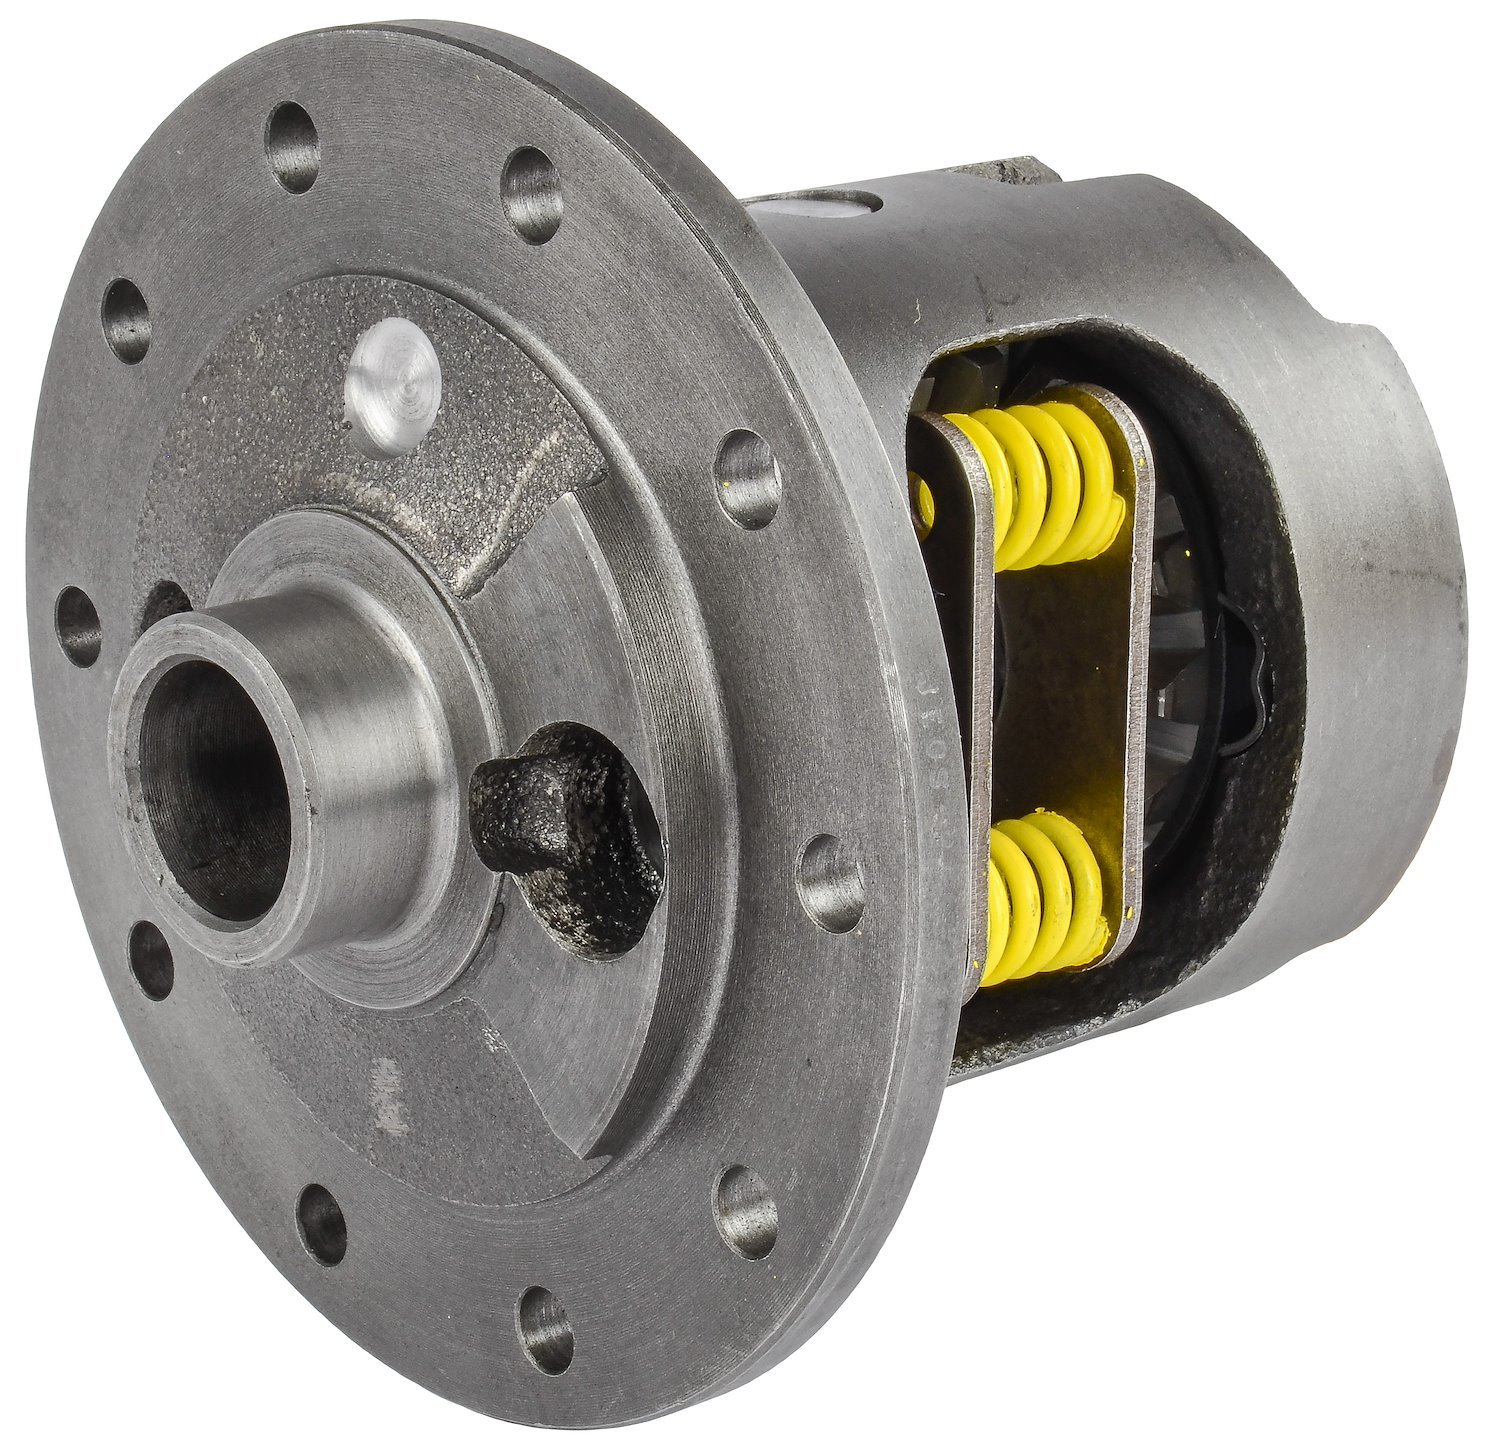 Posi Traction Differential for GM 8.500 in. 10-Bolt, 28-Spline